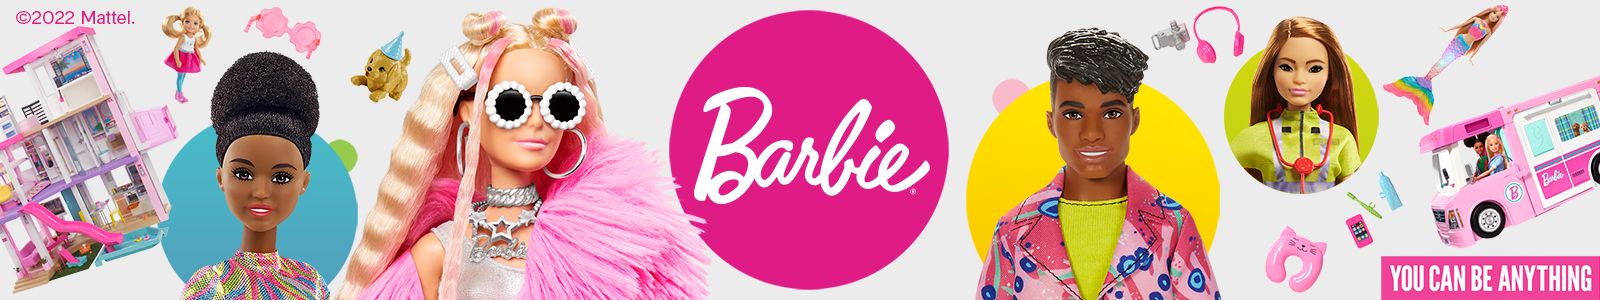 Barbie, You can be anything